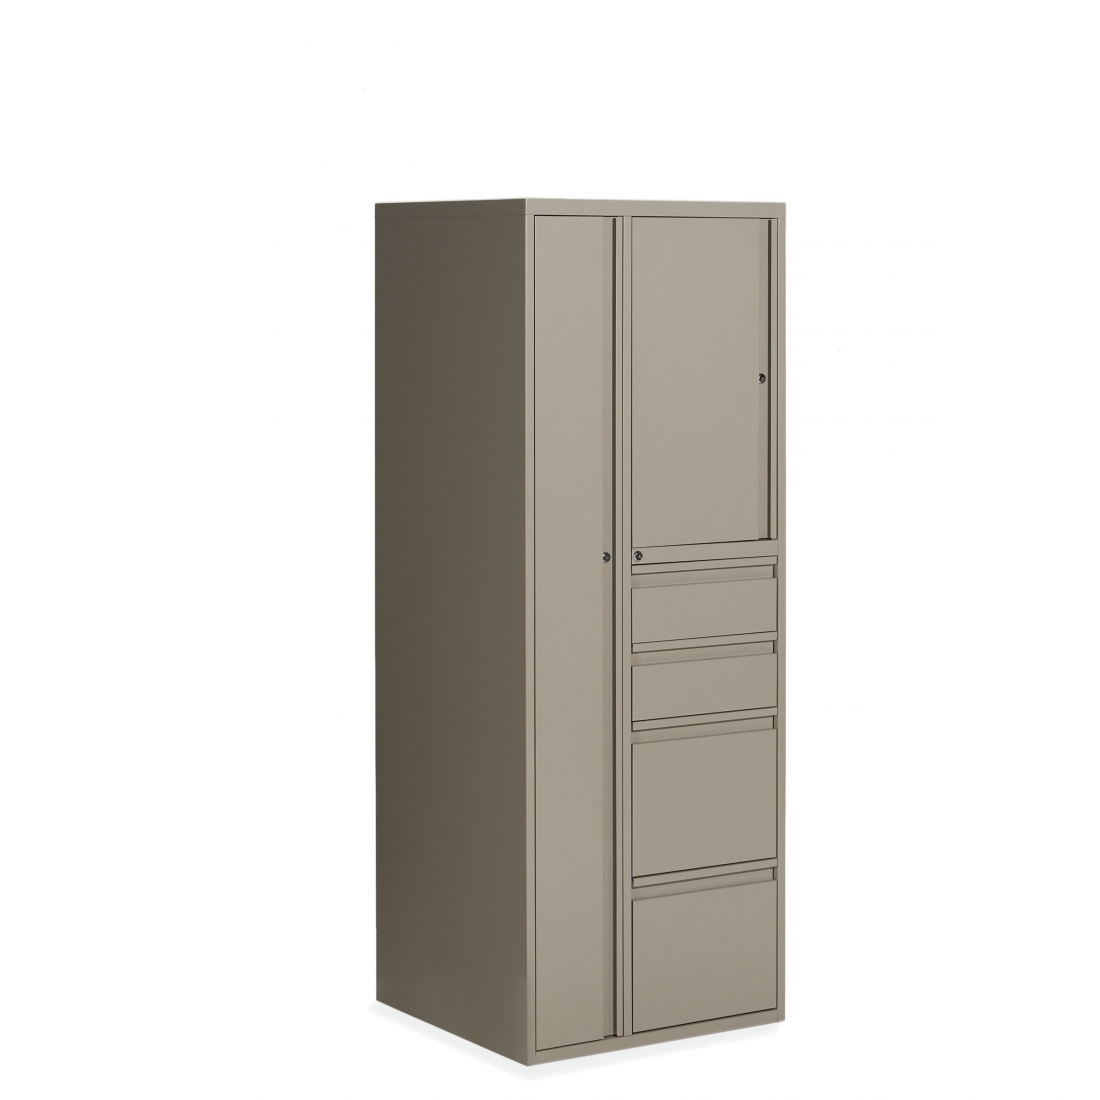 Personal Tower, Wardrobe - Left, Two Box, Two File - Right